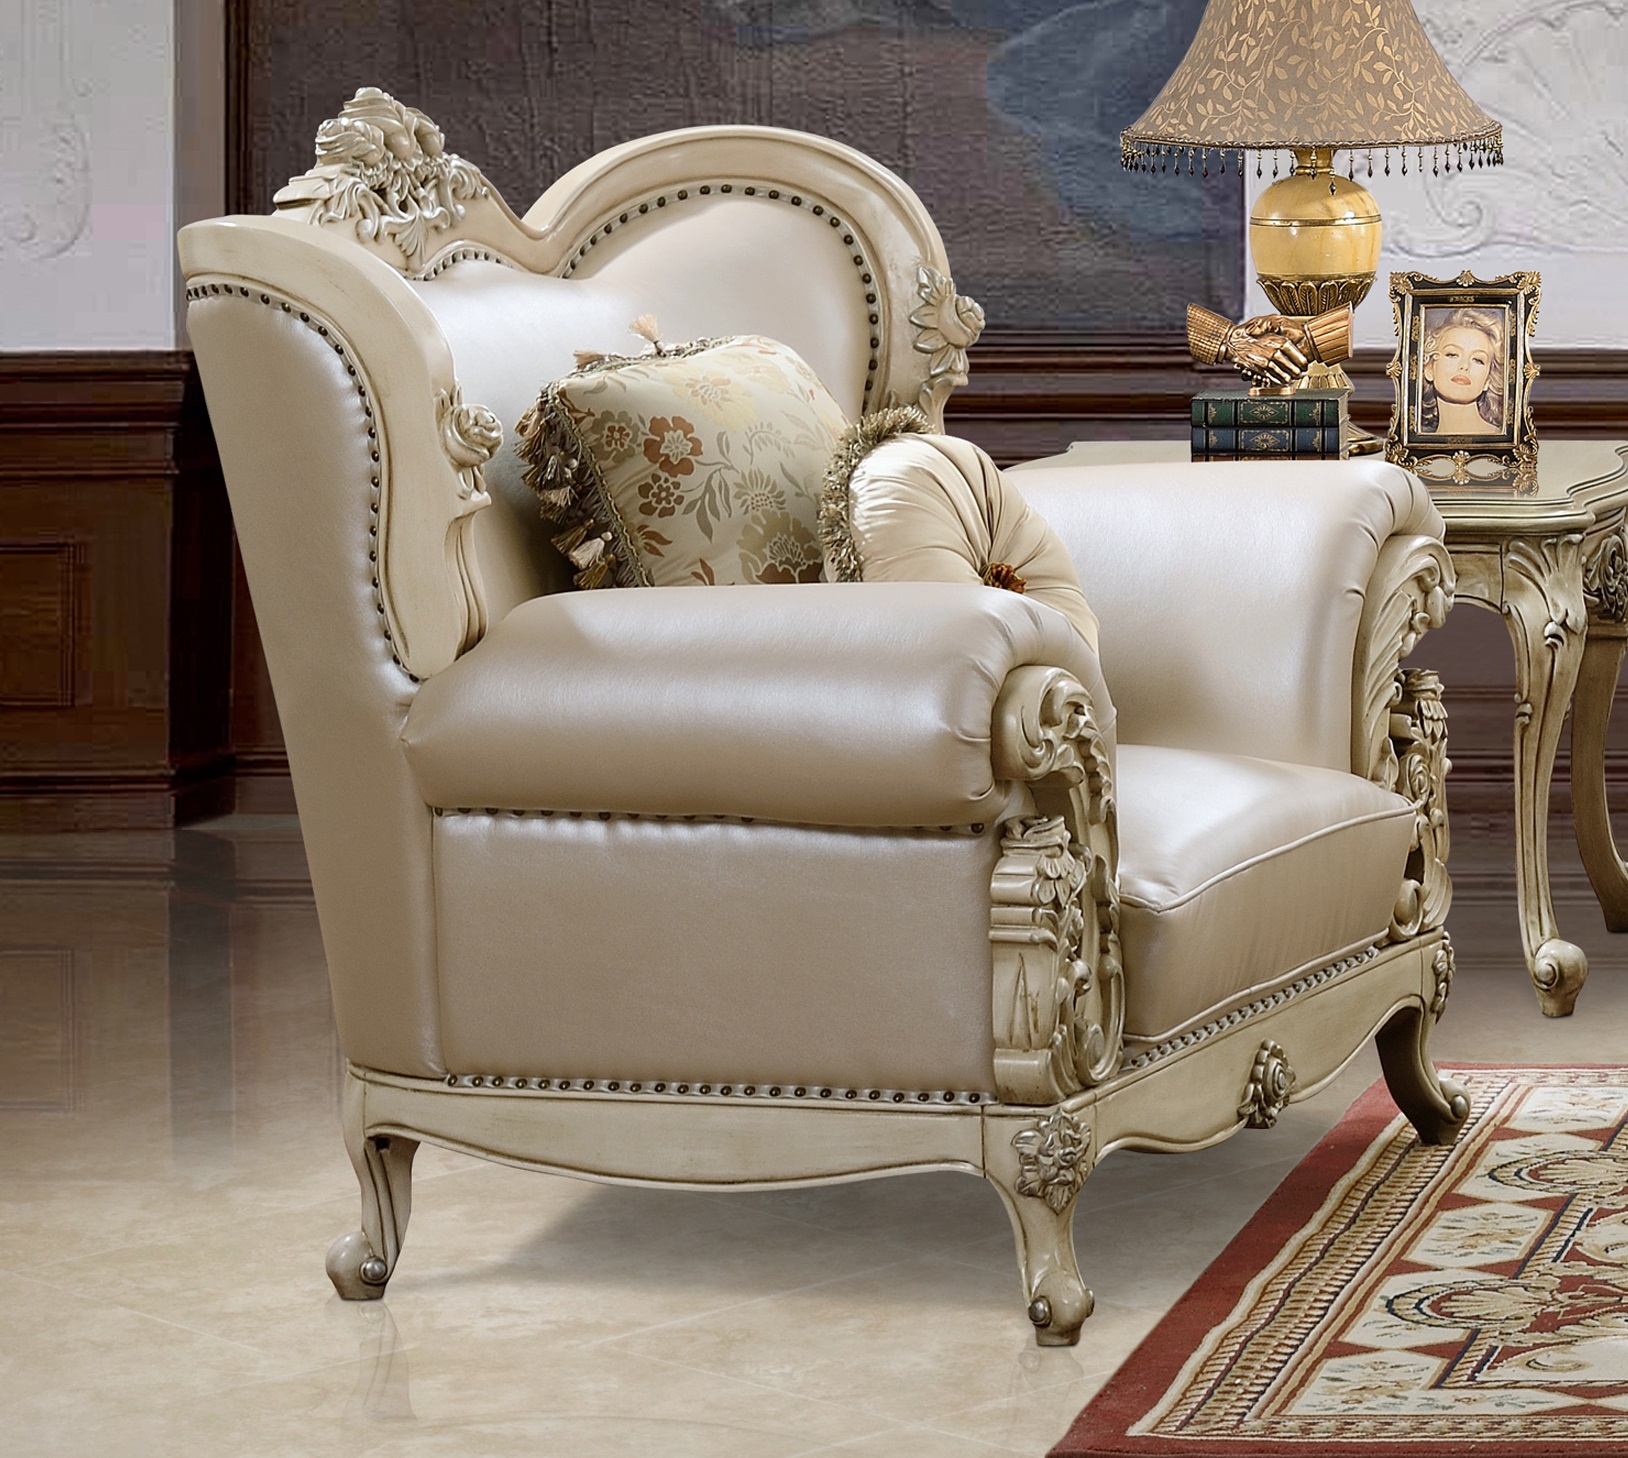 Interior Design Chair: A Touch Of Luxury In Your Home